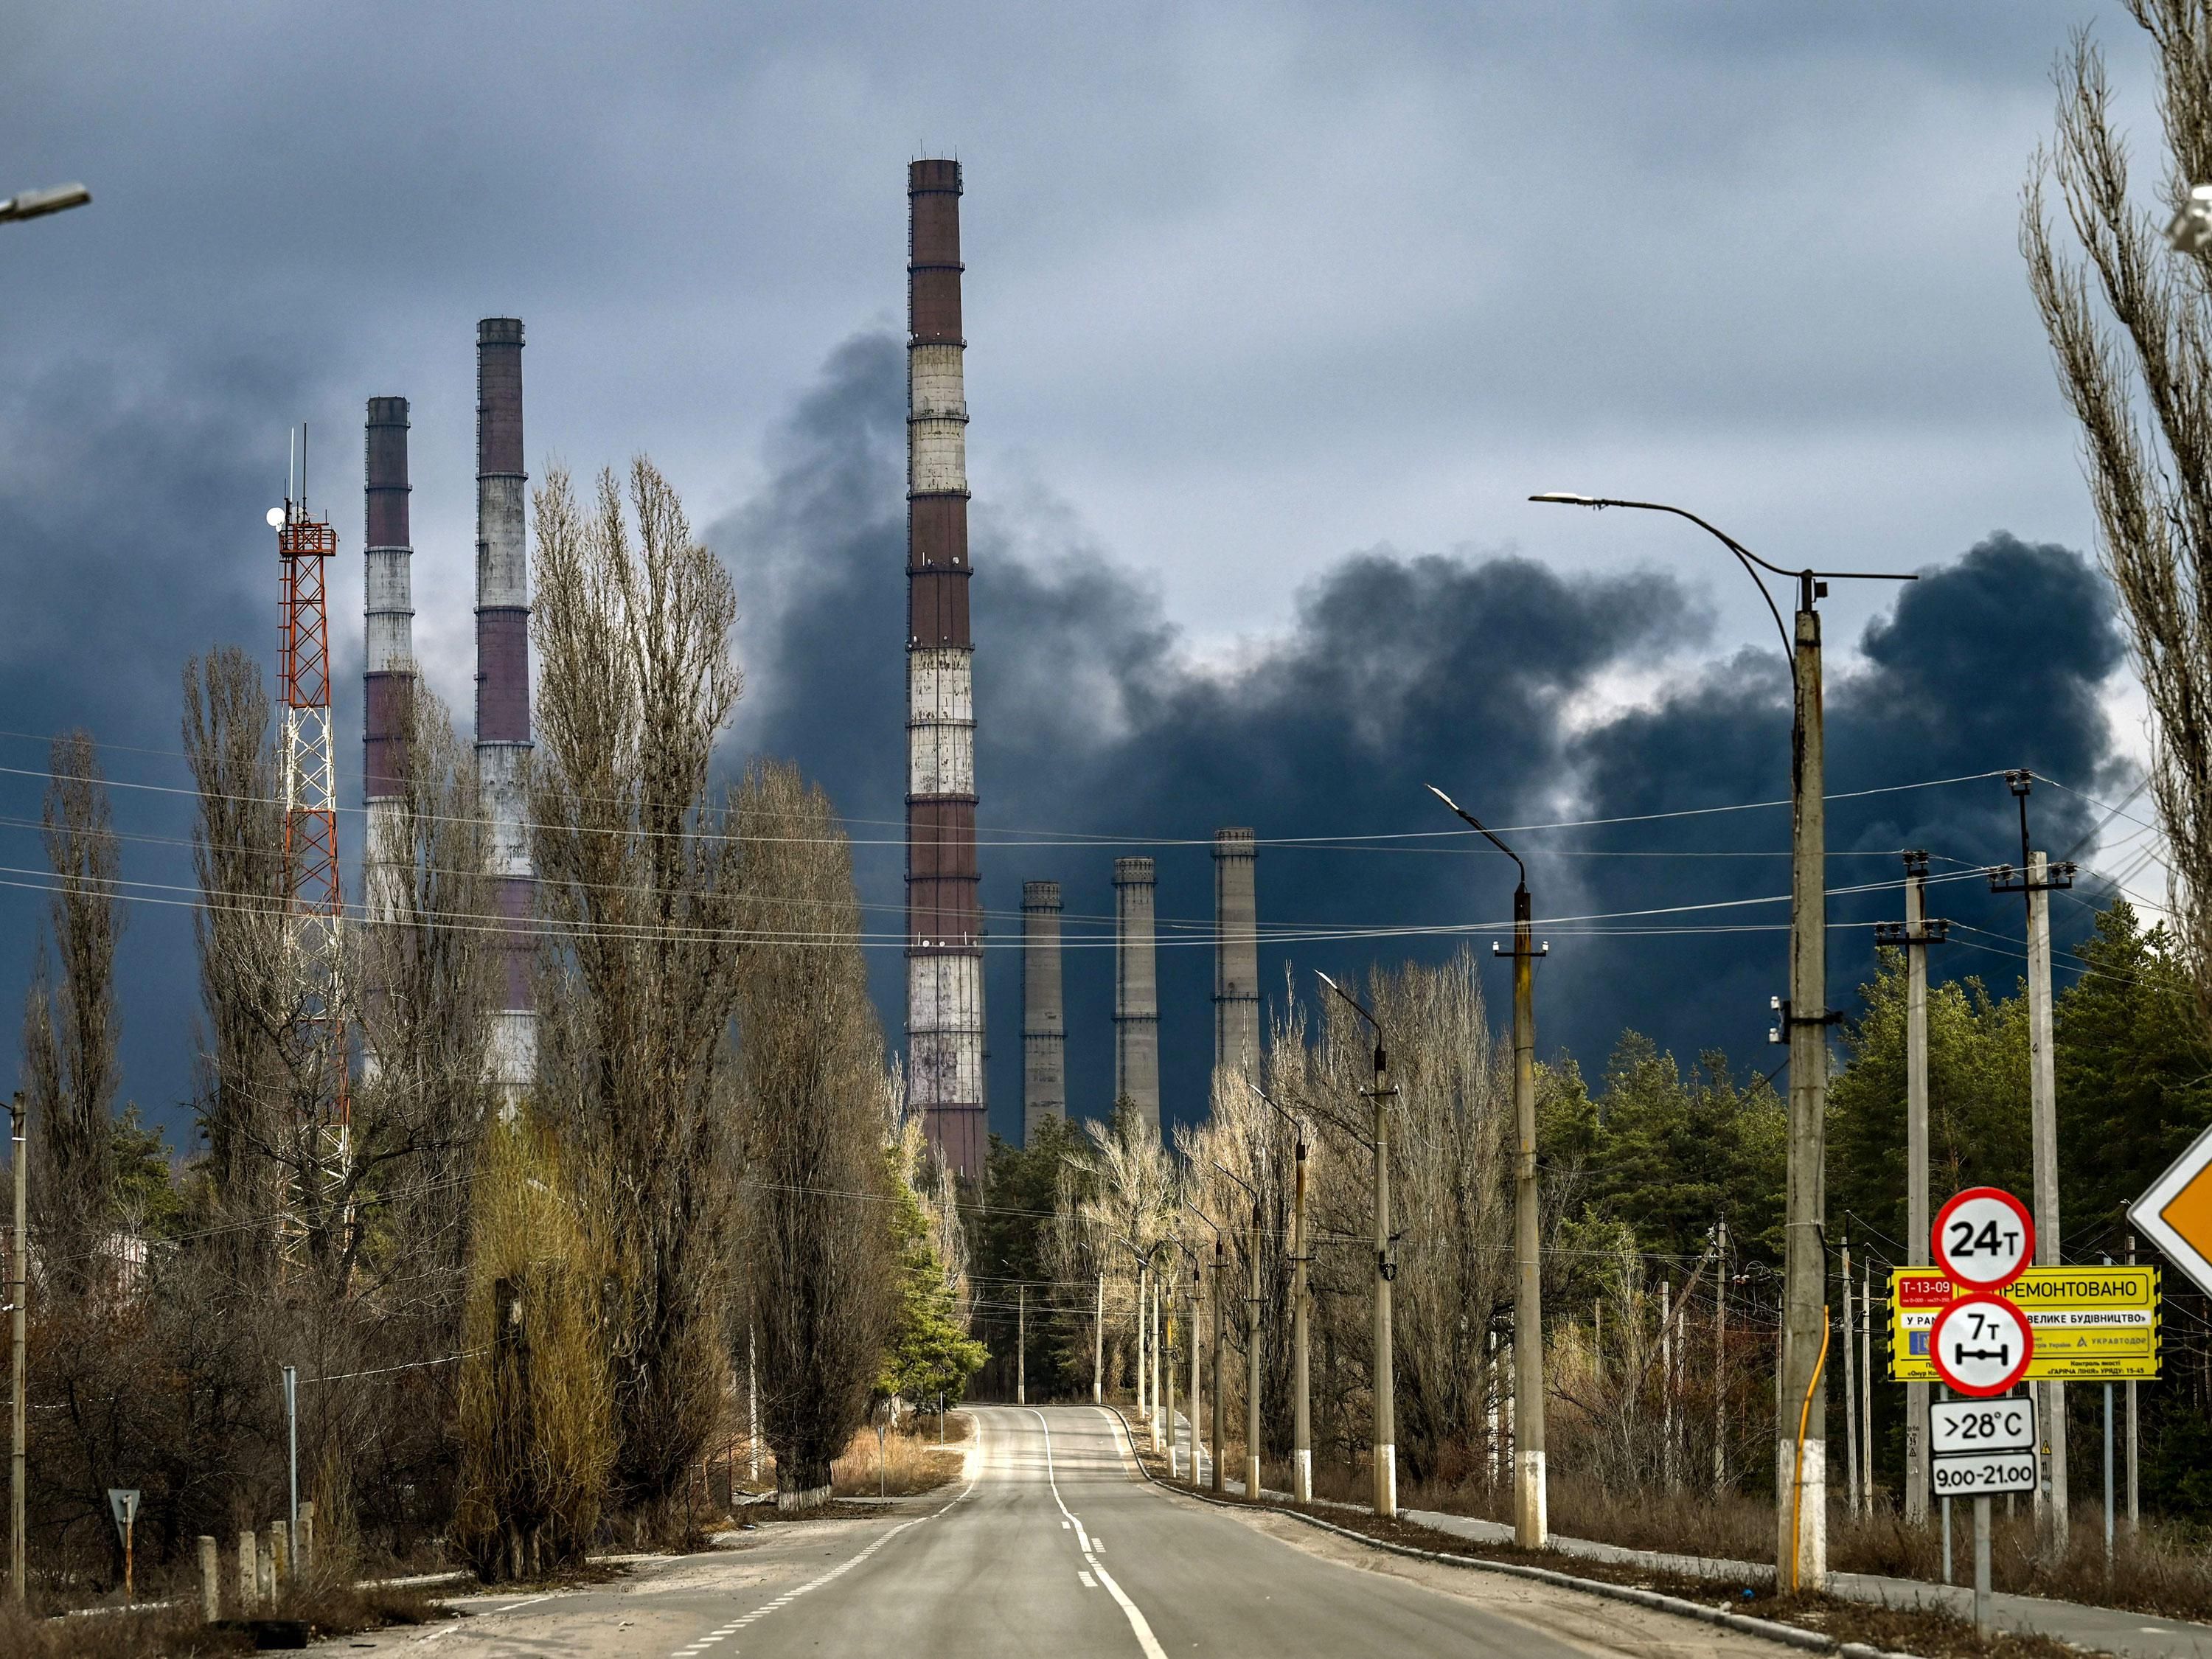 Smoke rises from a power plant after shelling outside the town of Shchastya, near the Ukraine city of Lugansk.